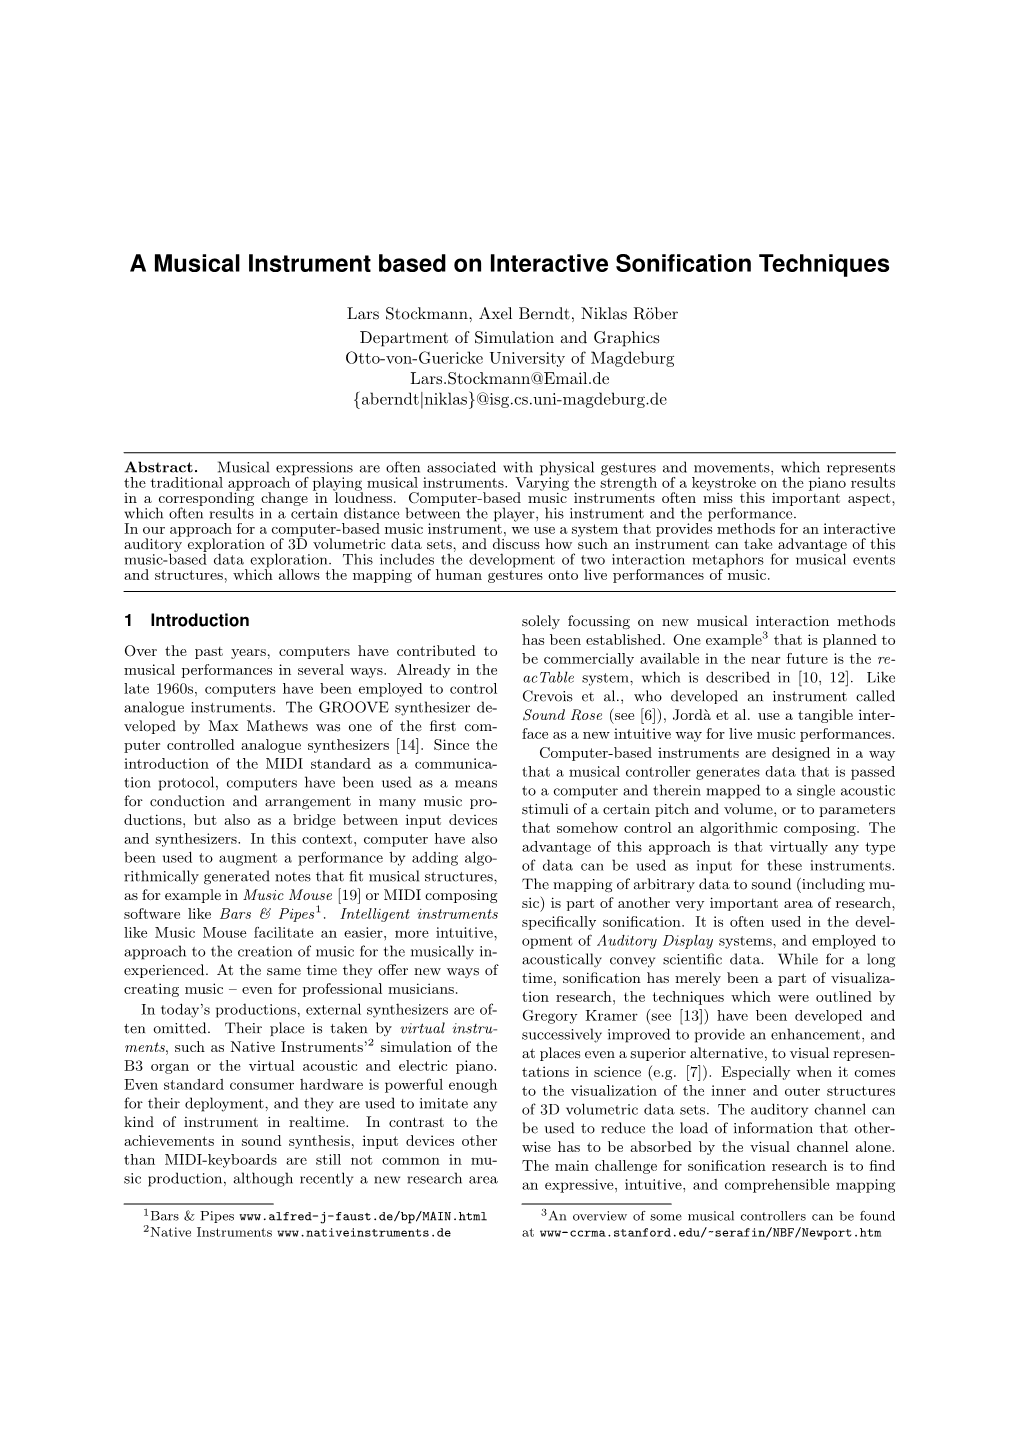 A Musical Instrument Based on Interactive Sonification Techniques